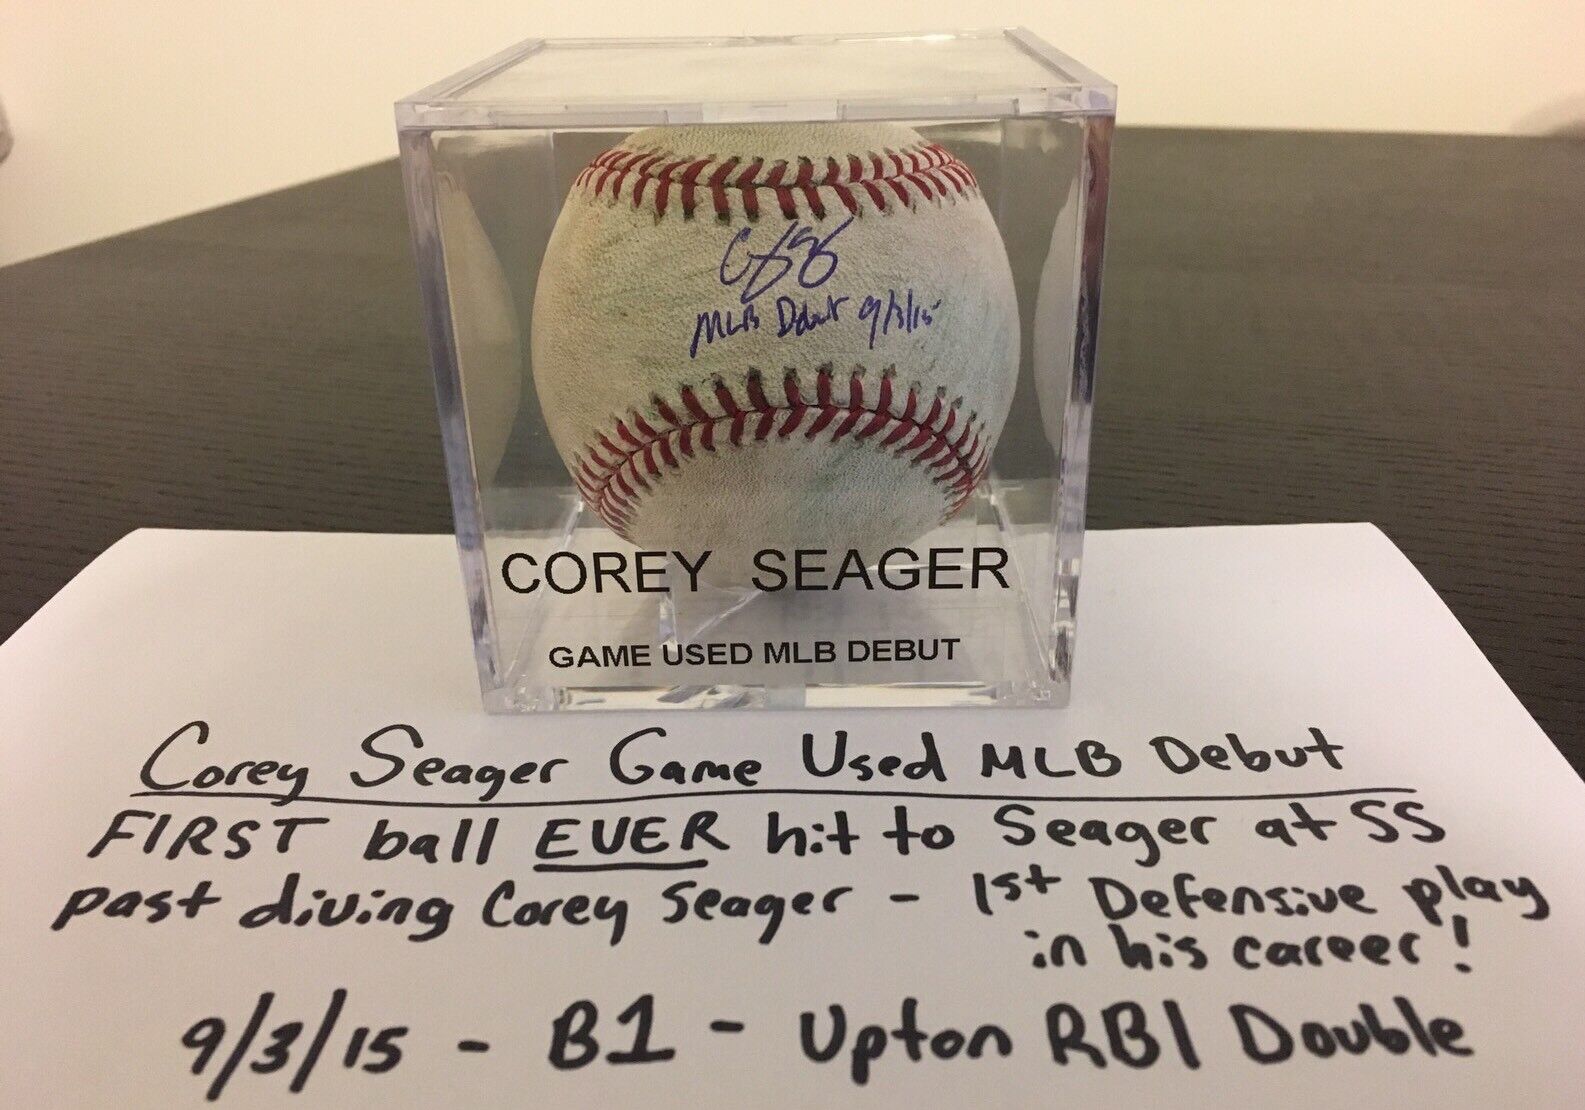 COREY SEAGER Game Used AUTO MLB Debut 1ST BALL EVER HIT TO SEAGER MLB/Fanatics